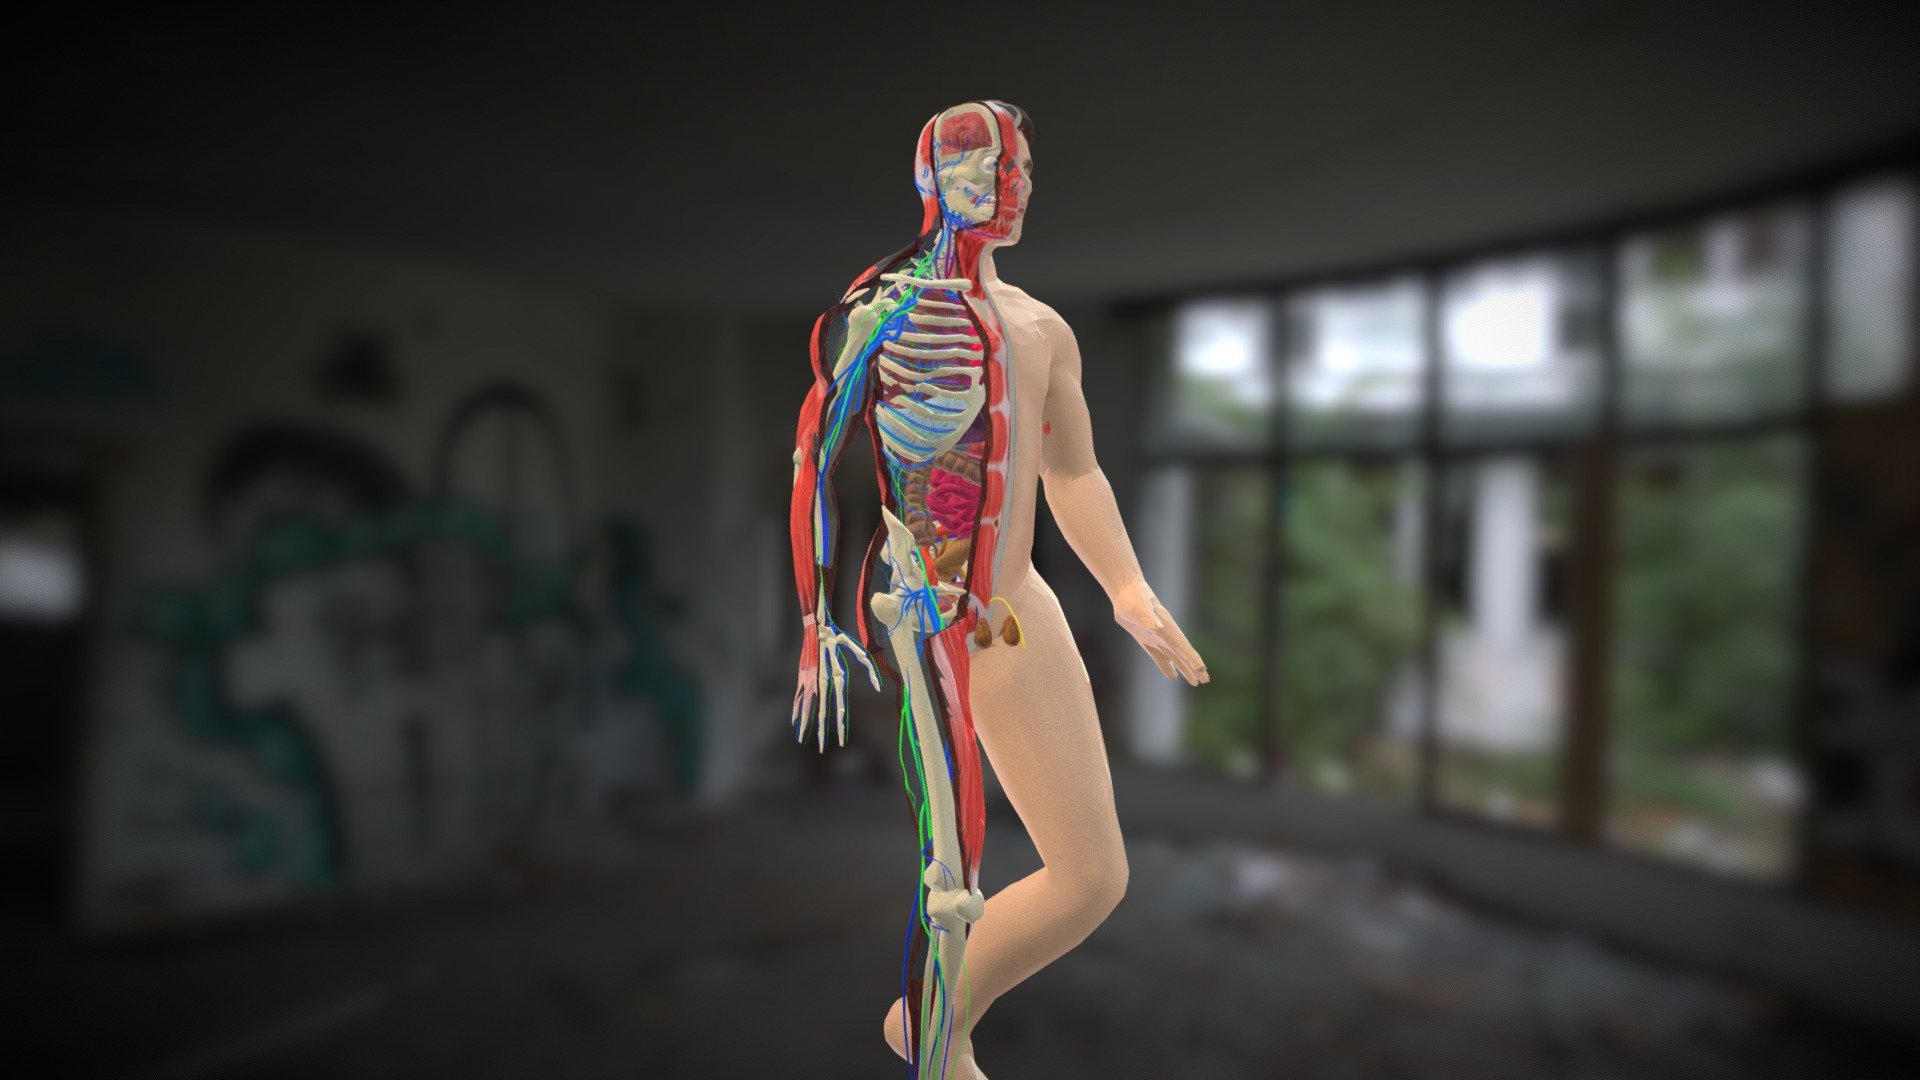 Animation Dissection Male Anatomy Systems: &ndash;  This is an animation of the dissected human body, including: skin muscles bones organs nervous system circulatory system.
This human anatomy system contains a united dissection &hellip; but separated into leyers, also if you do a search among our models, you will find similar to this one, but more separated leyers 3d model